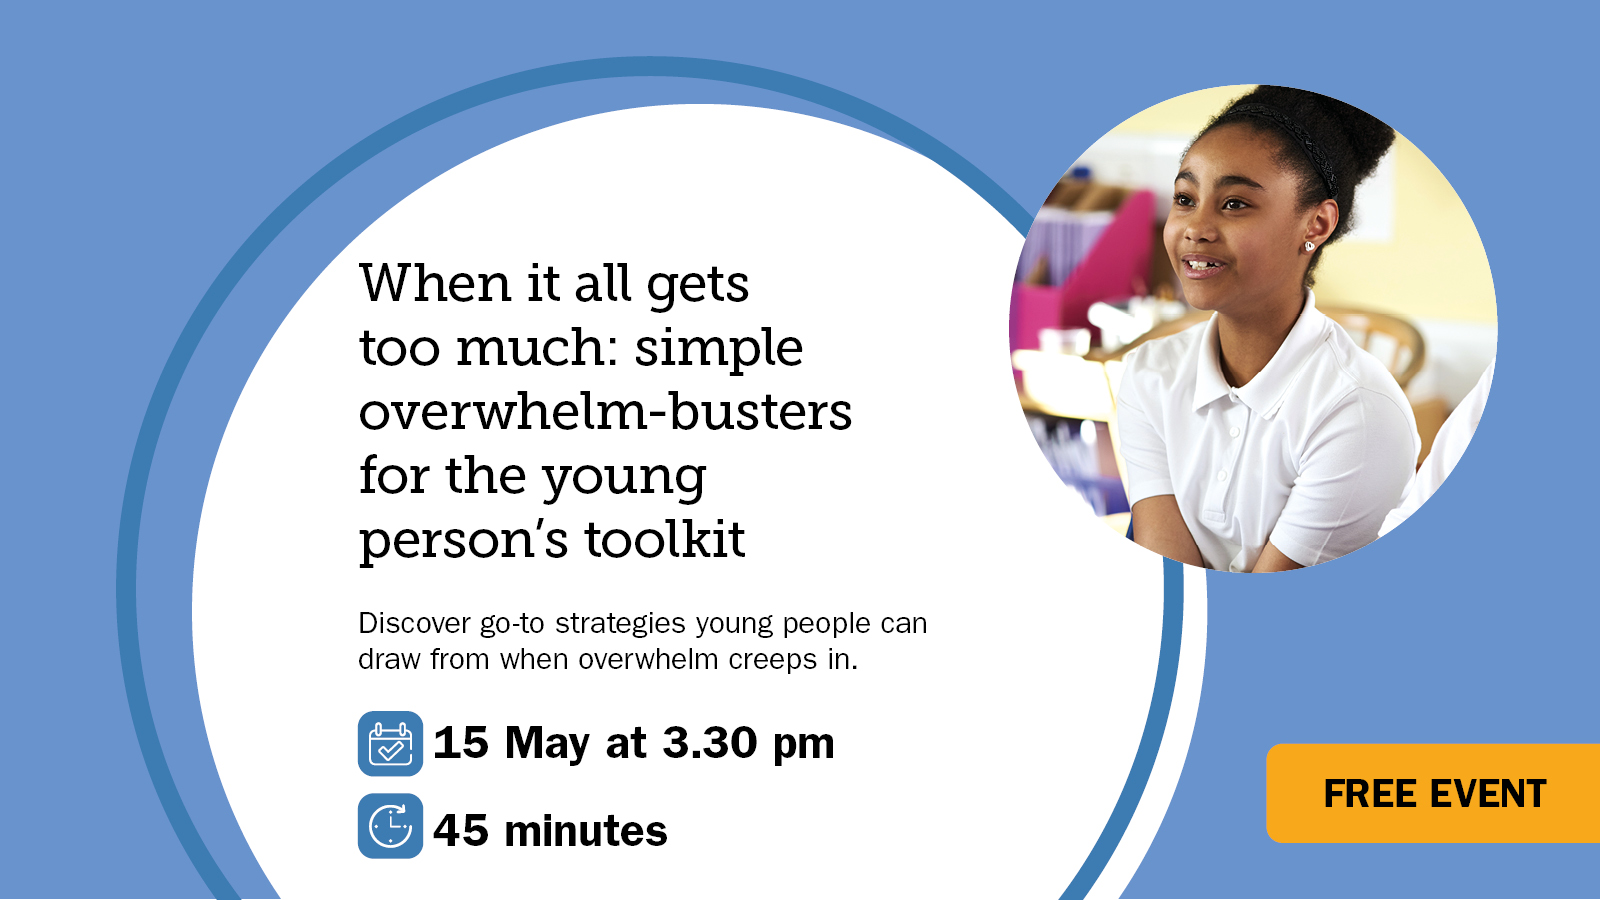 When it all gets too much: simple overwhelm-busters for the young person’s toolkit